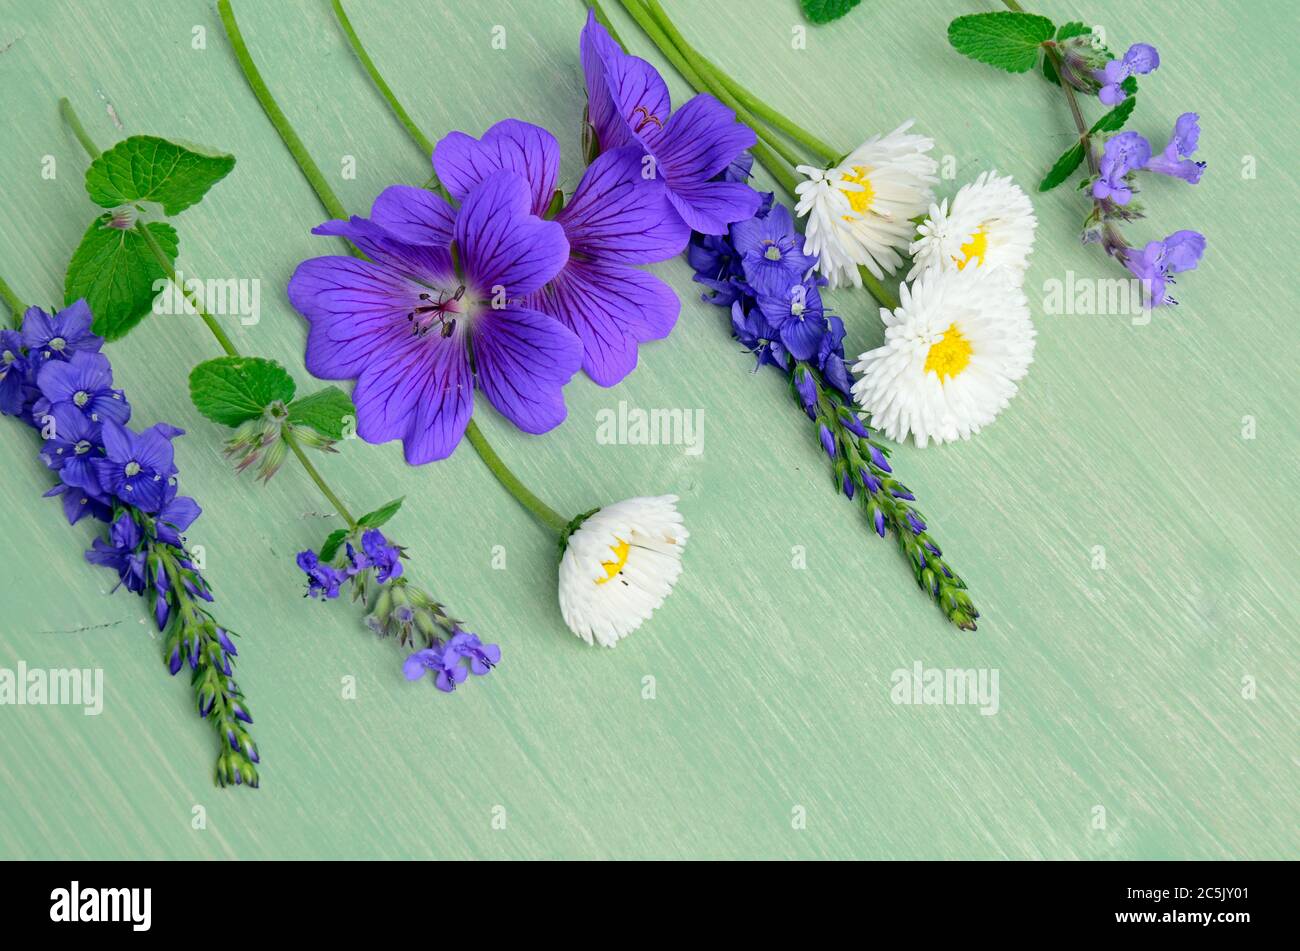 Garden flowers on a wooden table. Stock Photo